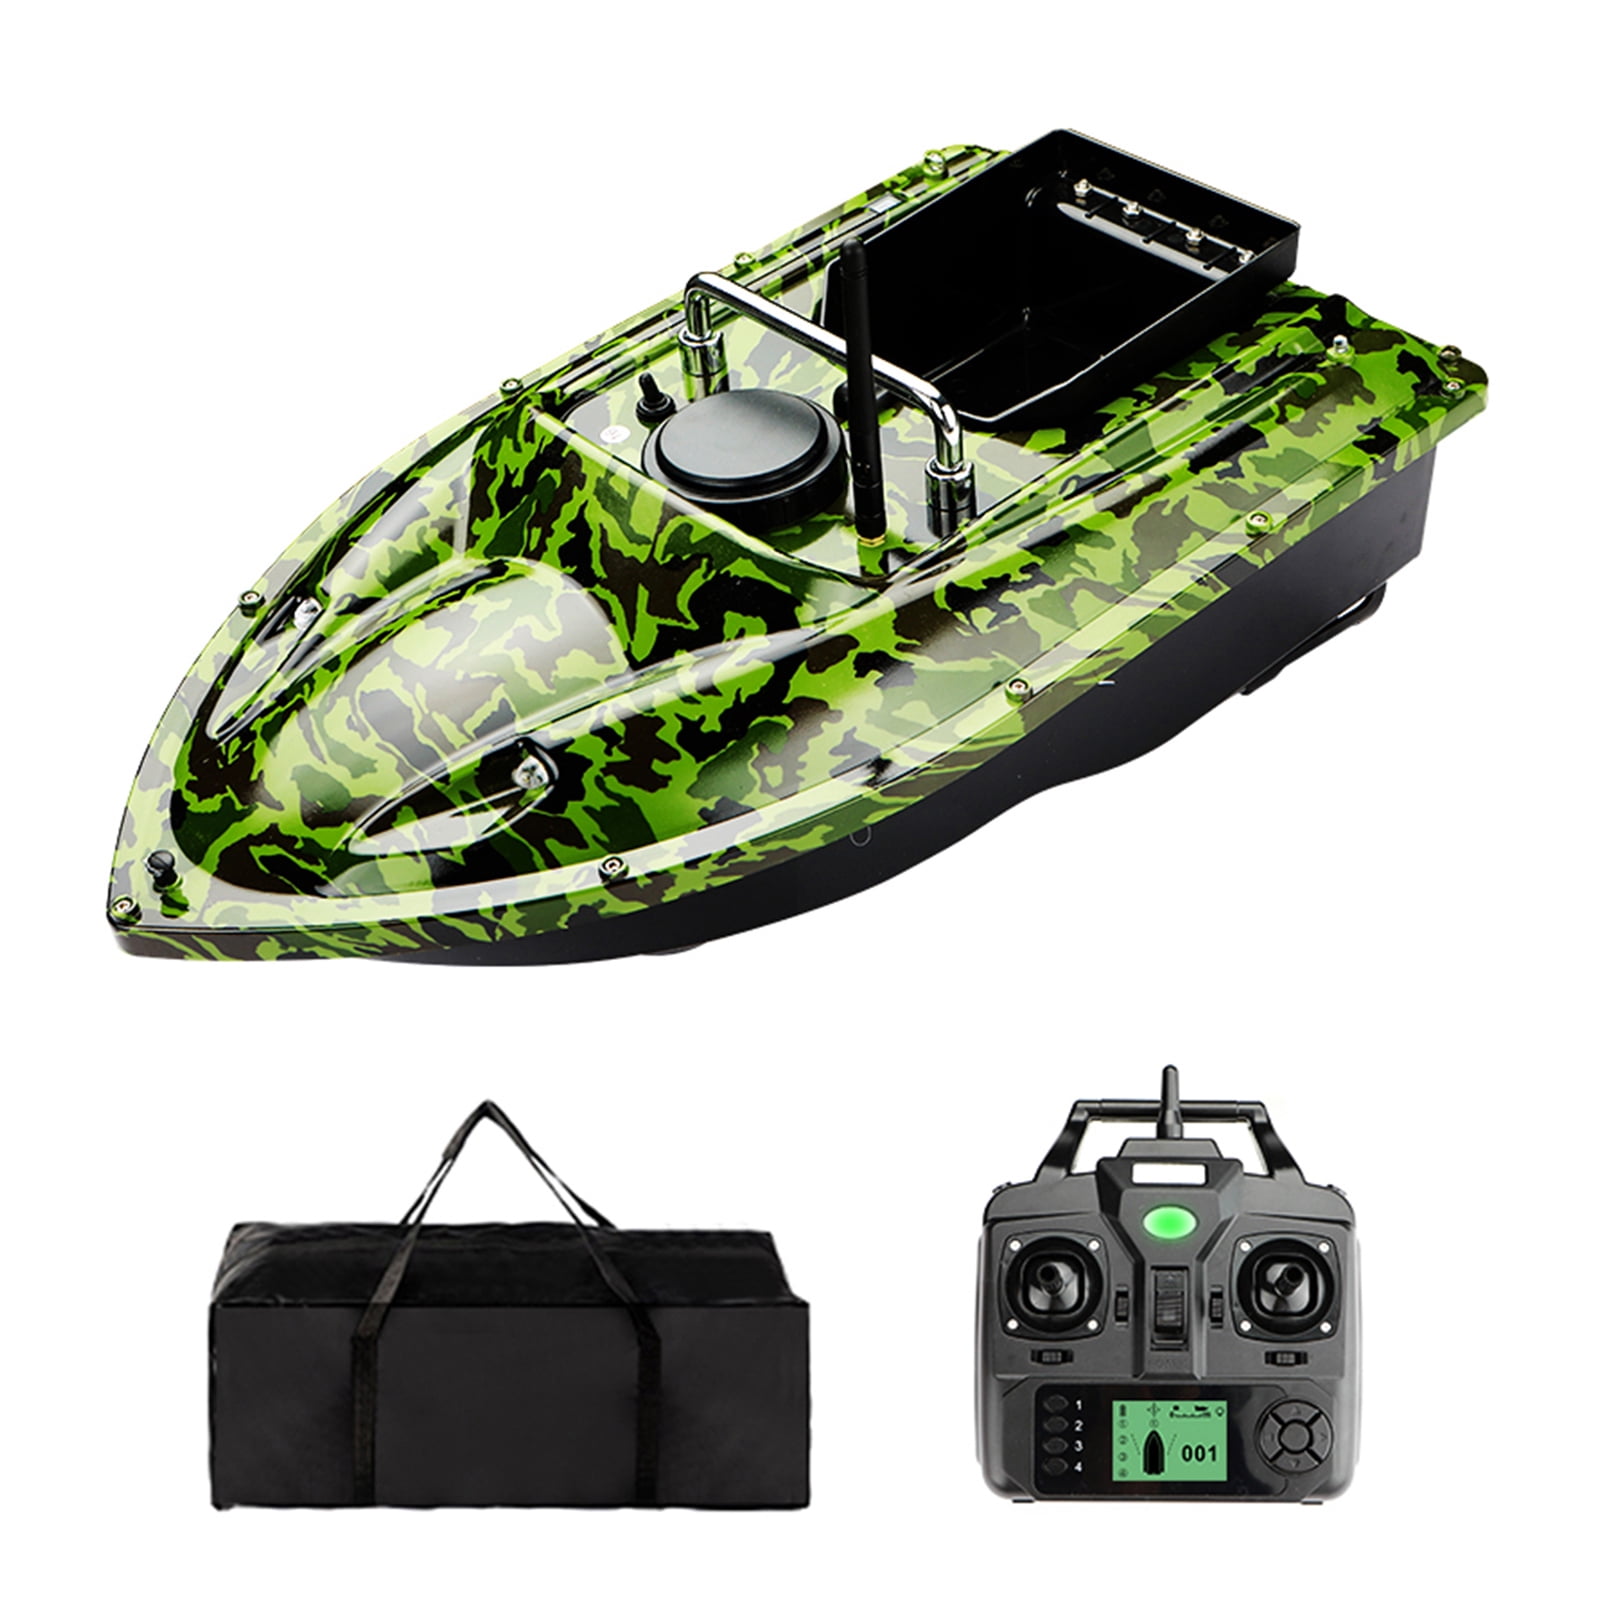 OWSOO Remote Control Bait Boat for Fishing Boat 500 Meters Double